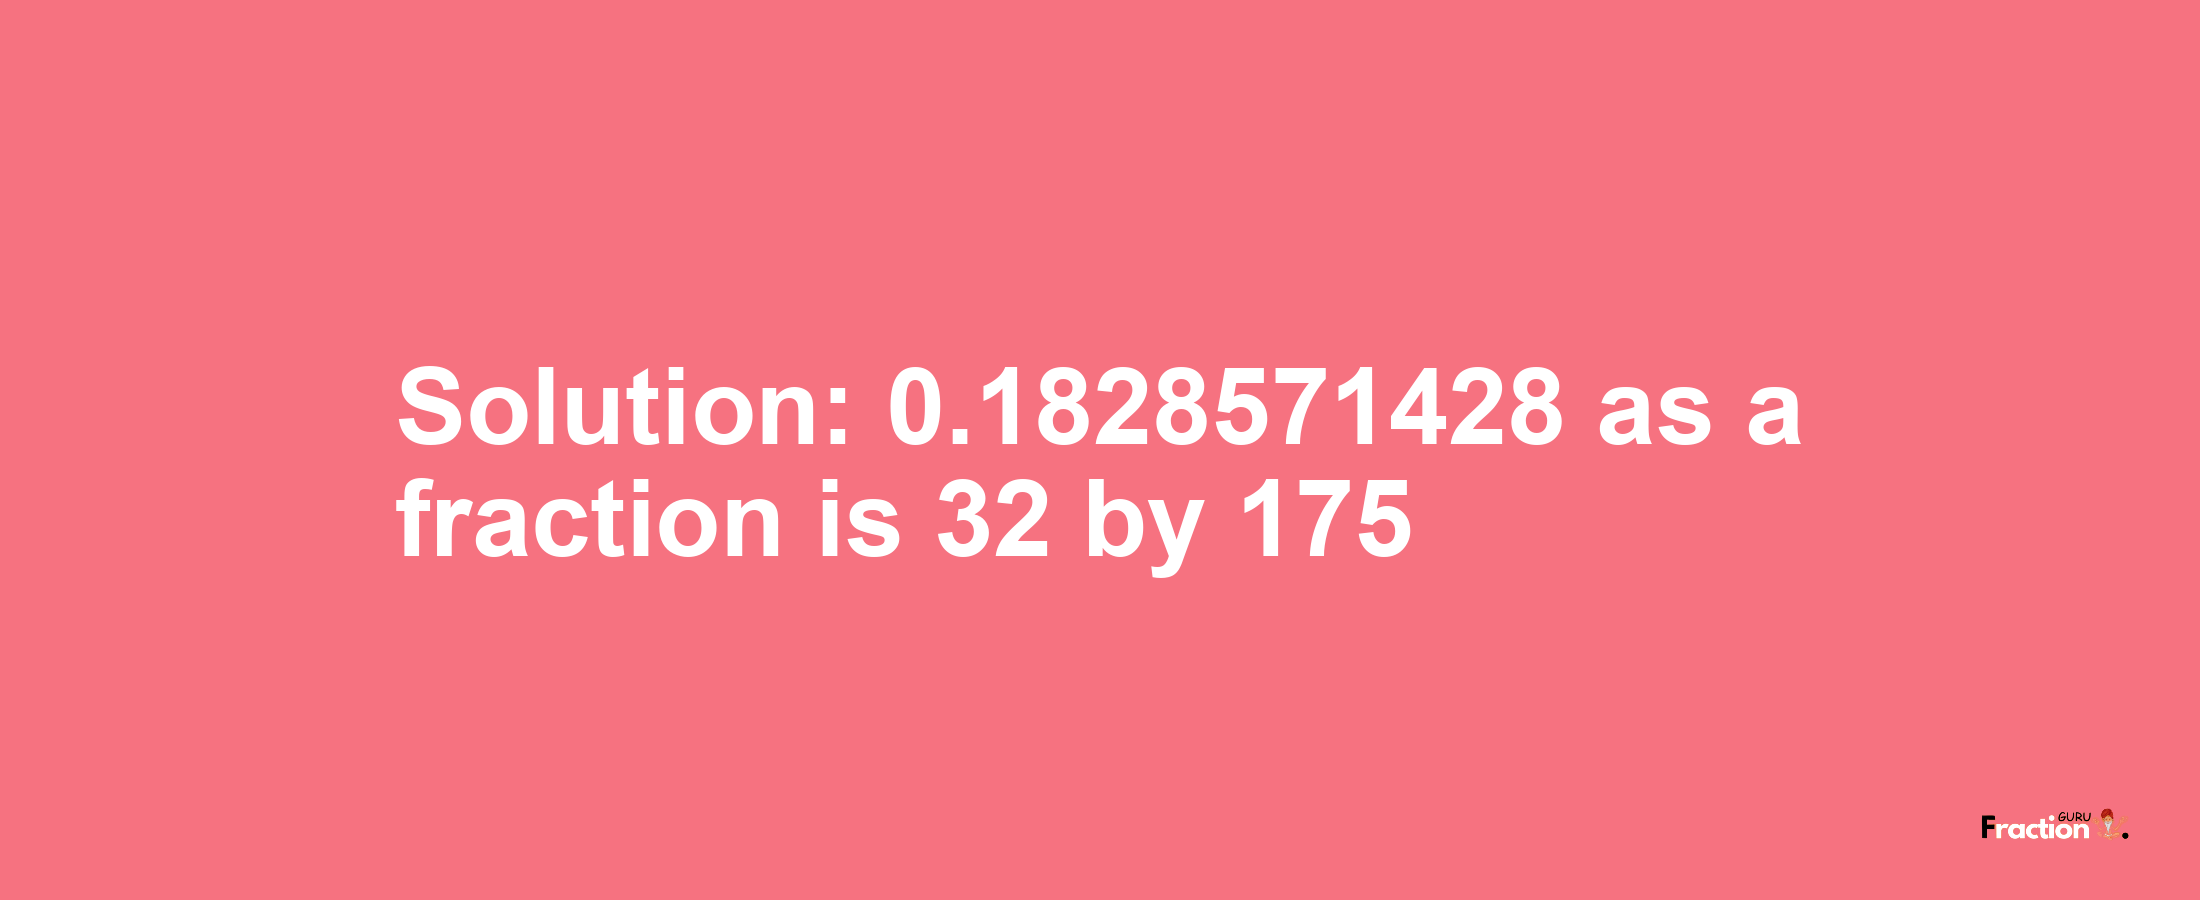 Solution:0.1828571428 as a fraction is 32/175